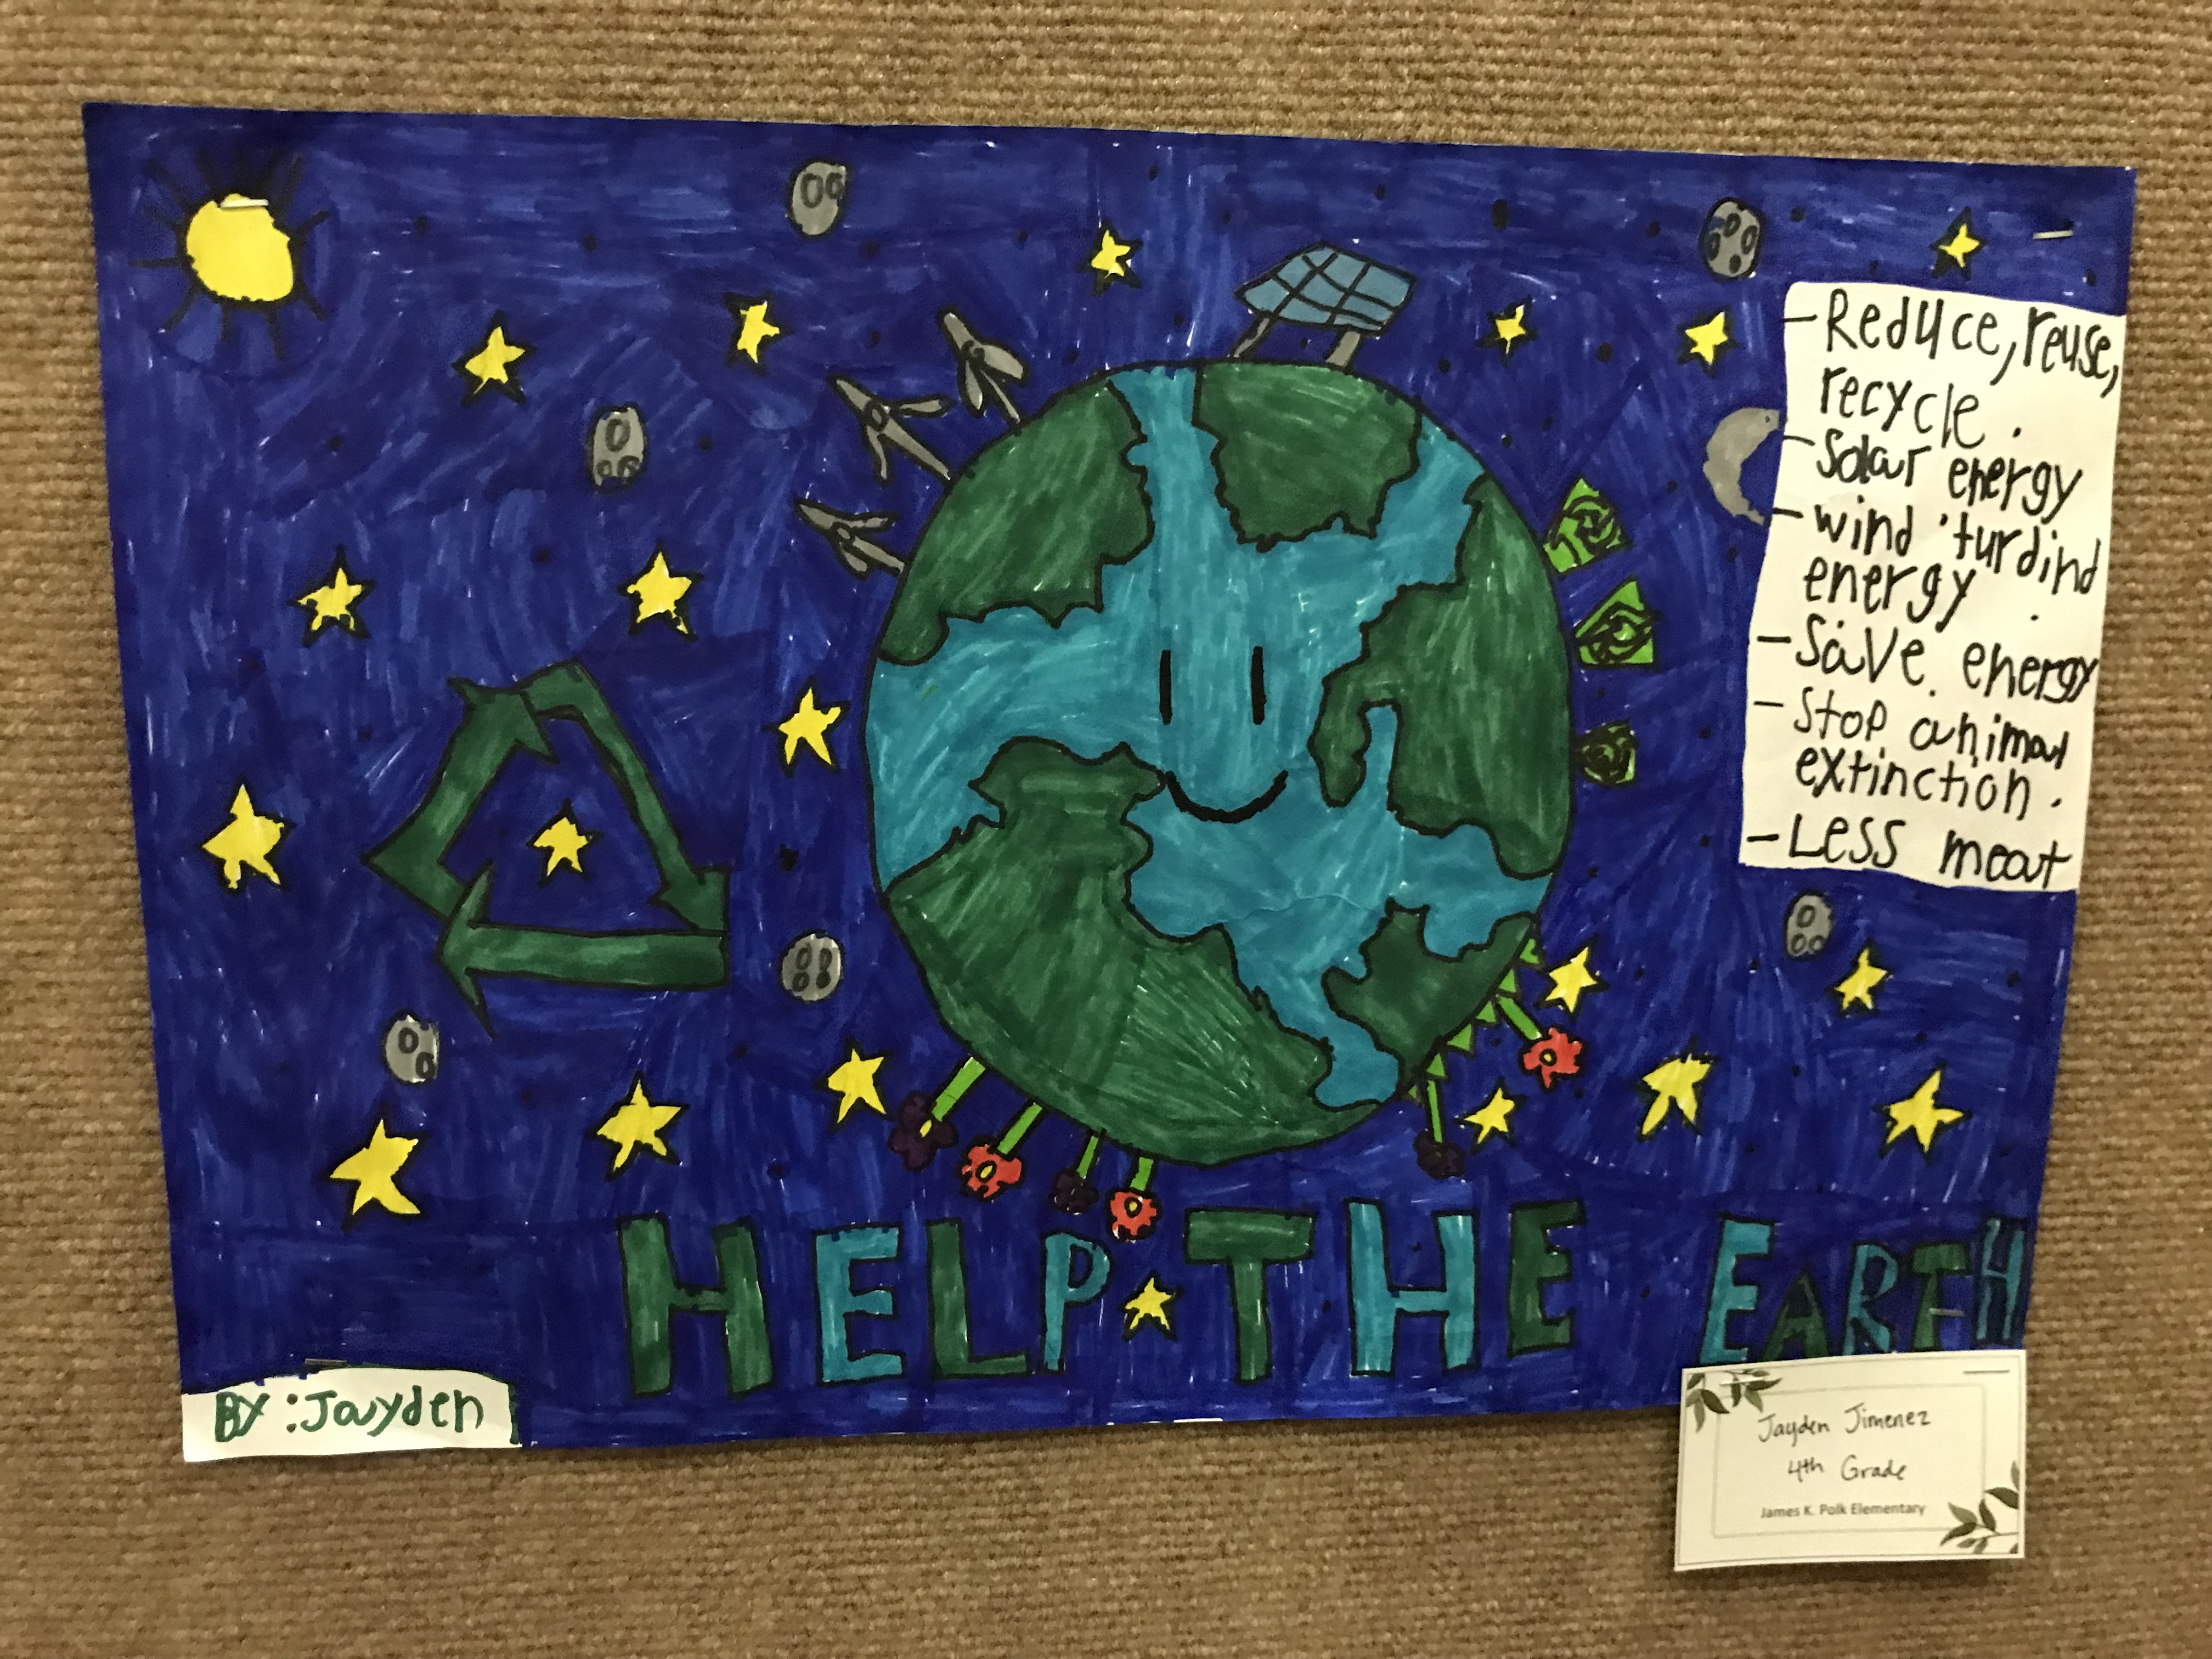 2022 Earth Day student art contest submission (marker drawing of globe against dark blue background)